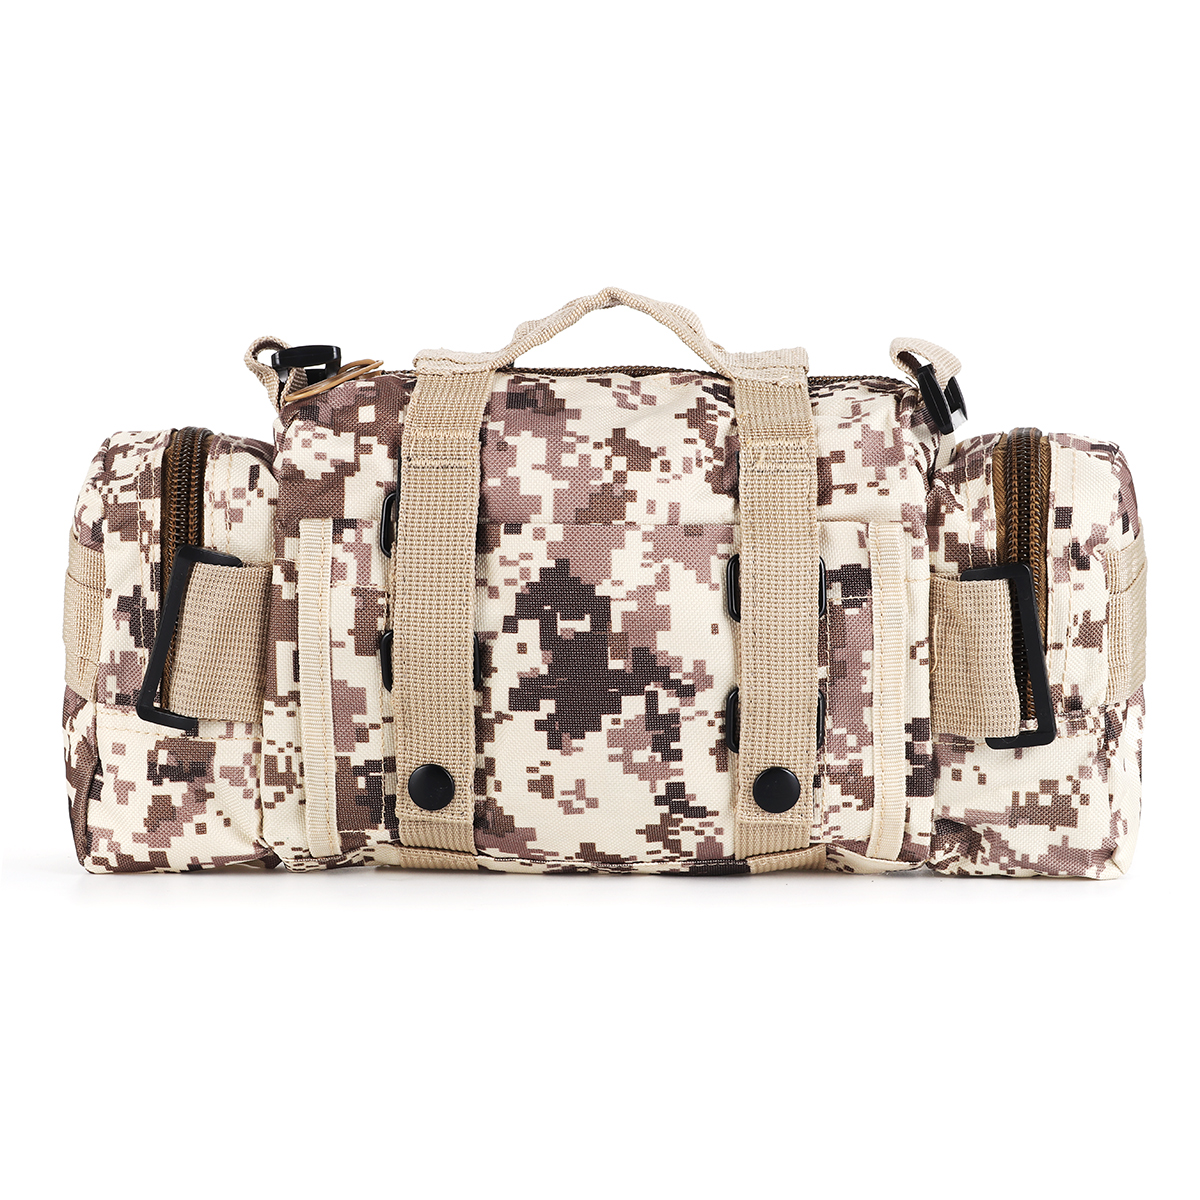 Multifunctional-Outdoor-Sports-Hiking-with-Zippers-Nylon-Oxford-Cloth-Tactical-Shoulder-Bag-Waist-Pa-1825563-8